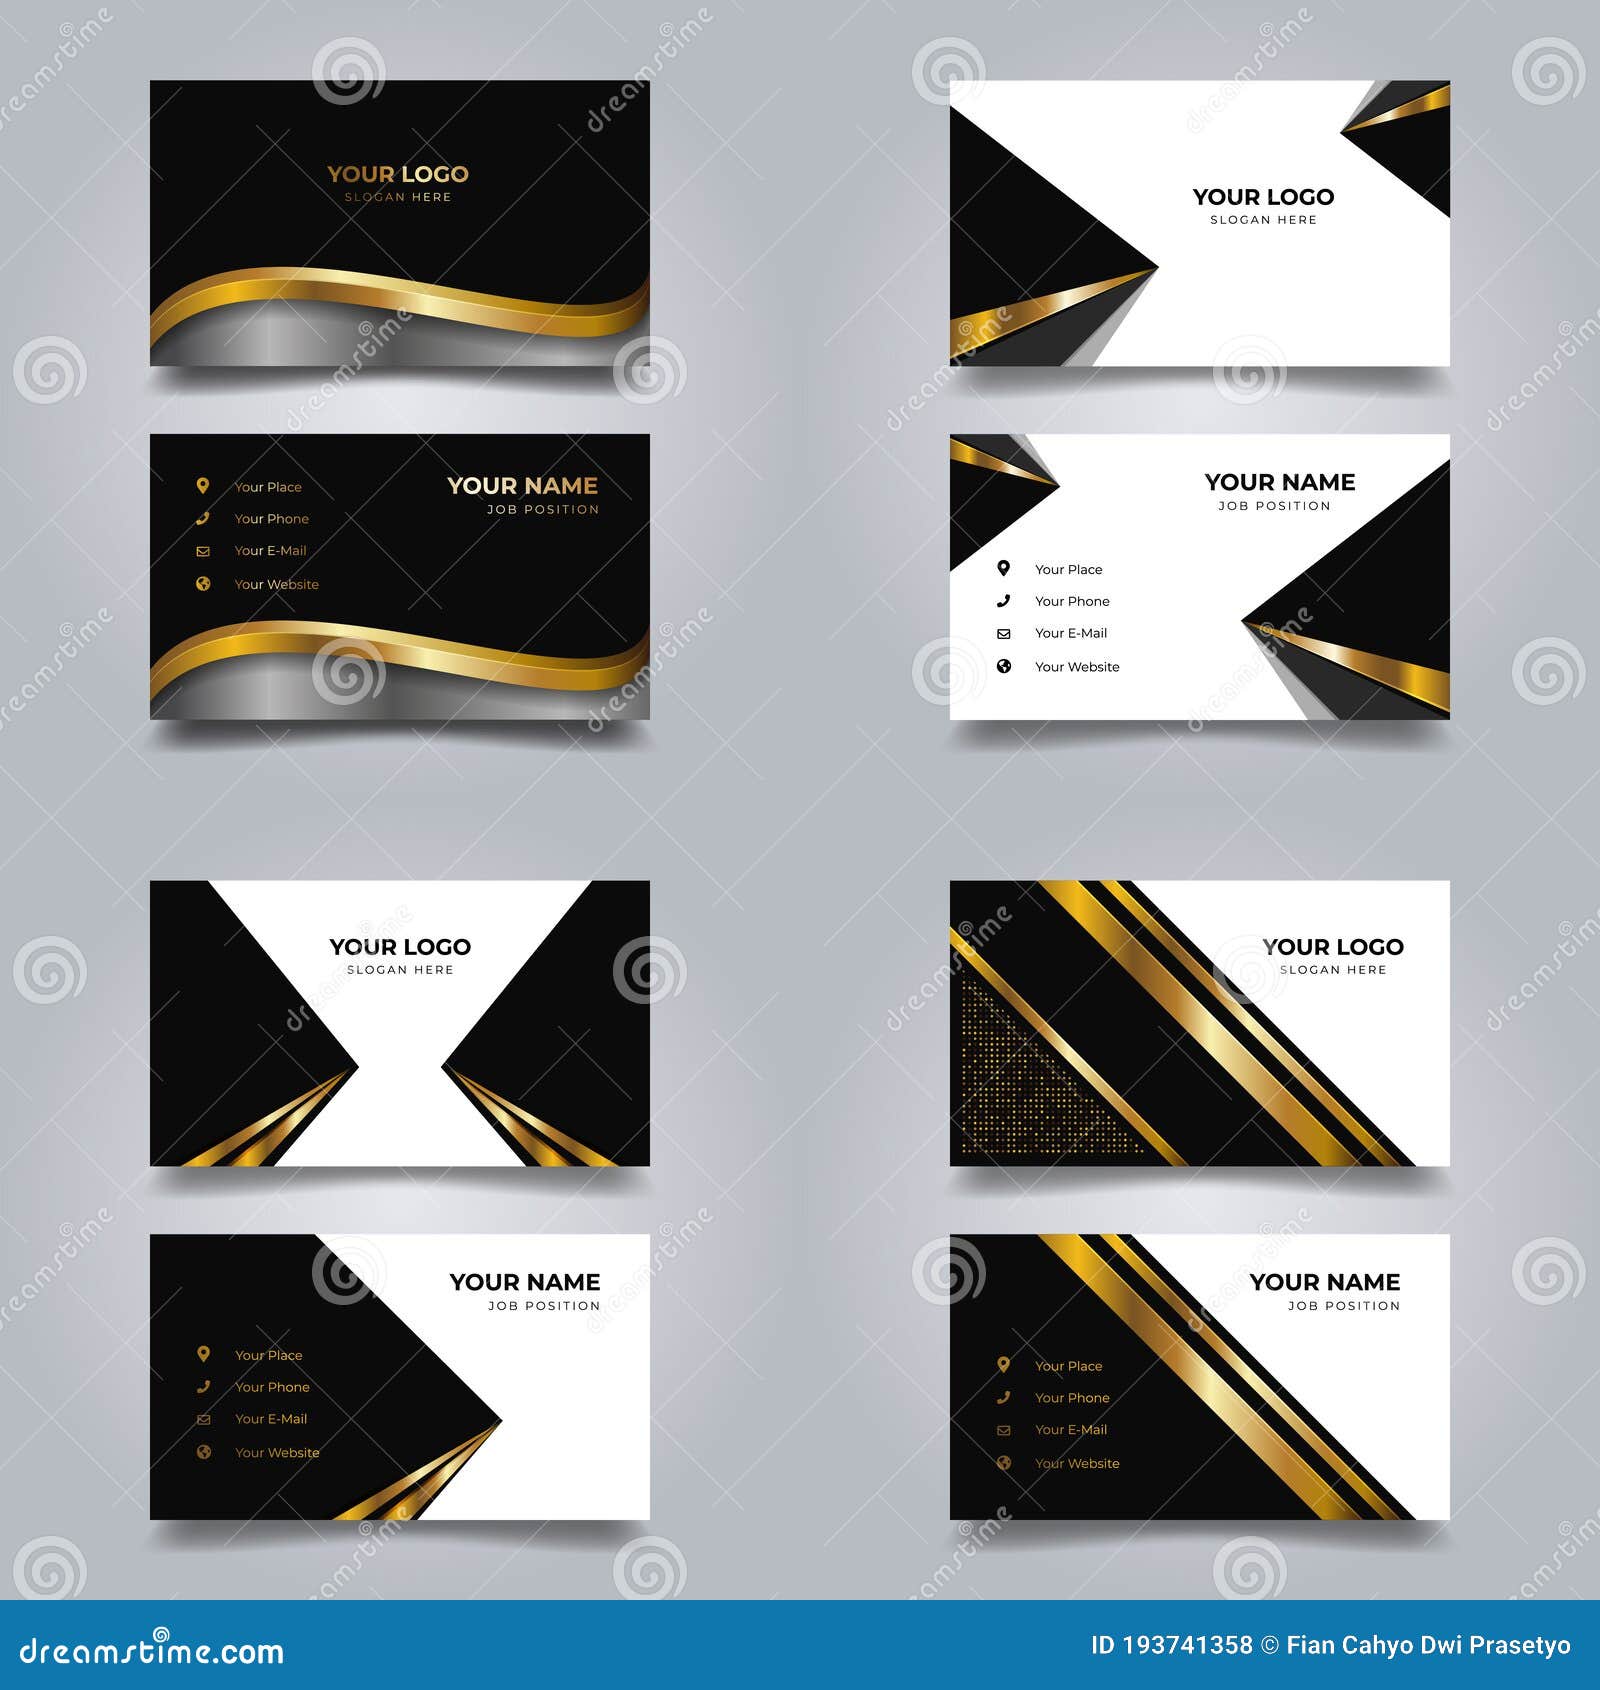 22,22 Business Card Template Photos - Free & Royalty-Free Stock With Regard To Buisness Card Templates